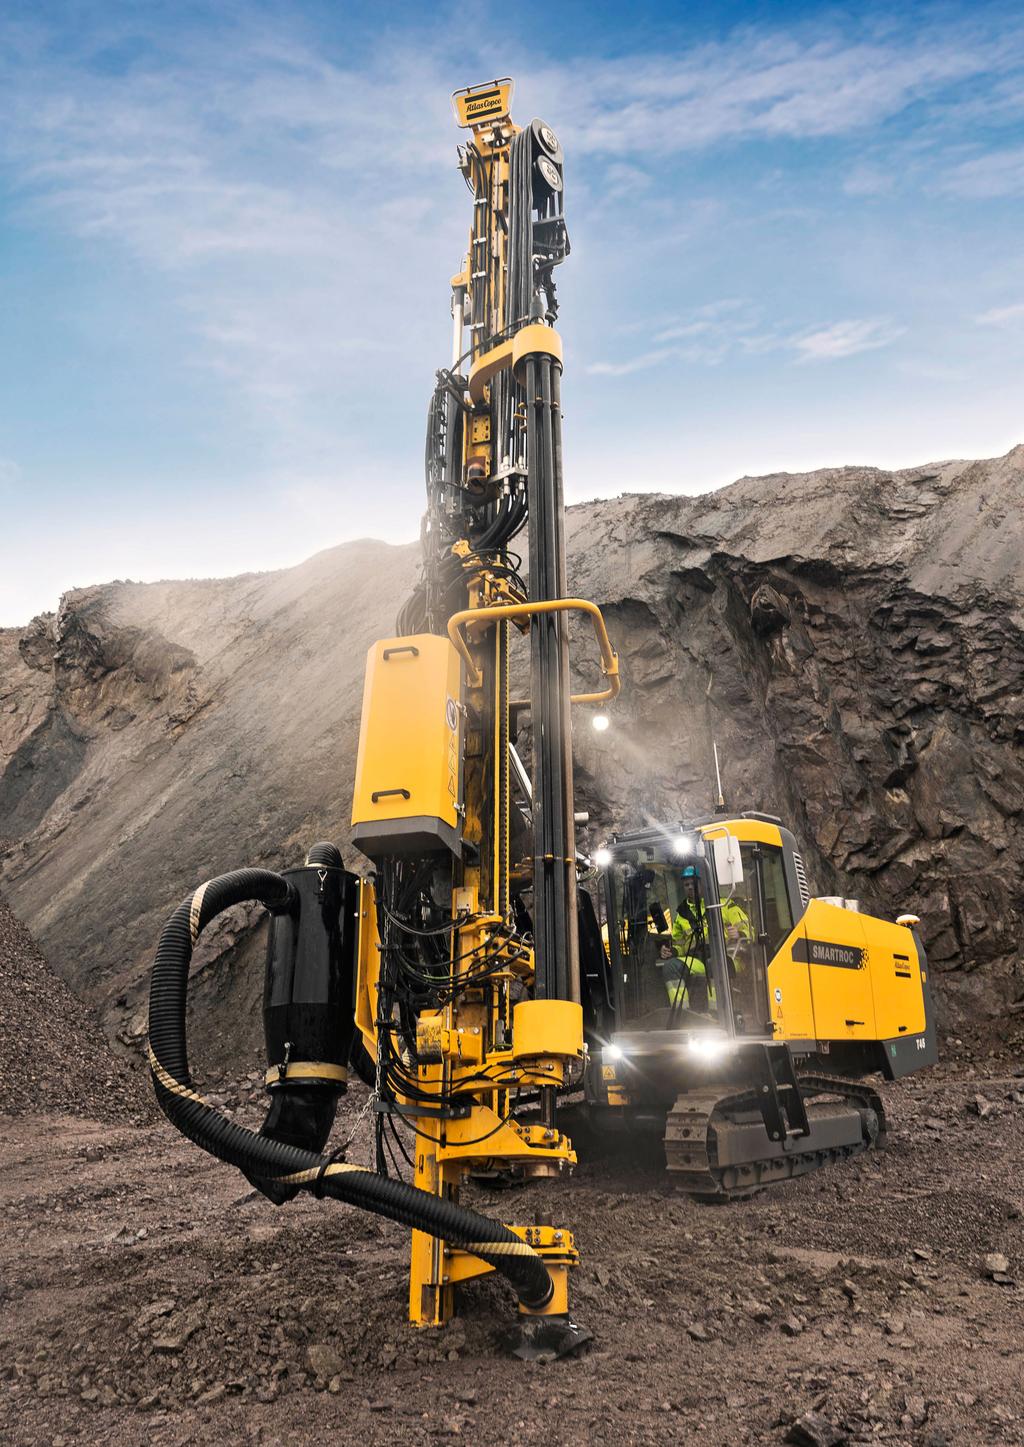 SMARTROC T45 Surface drill rig for quarrying and construction.